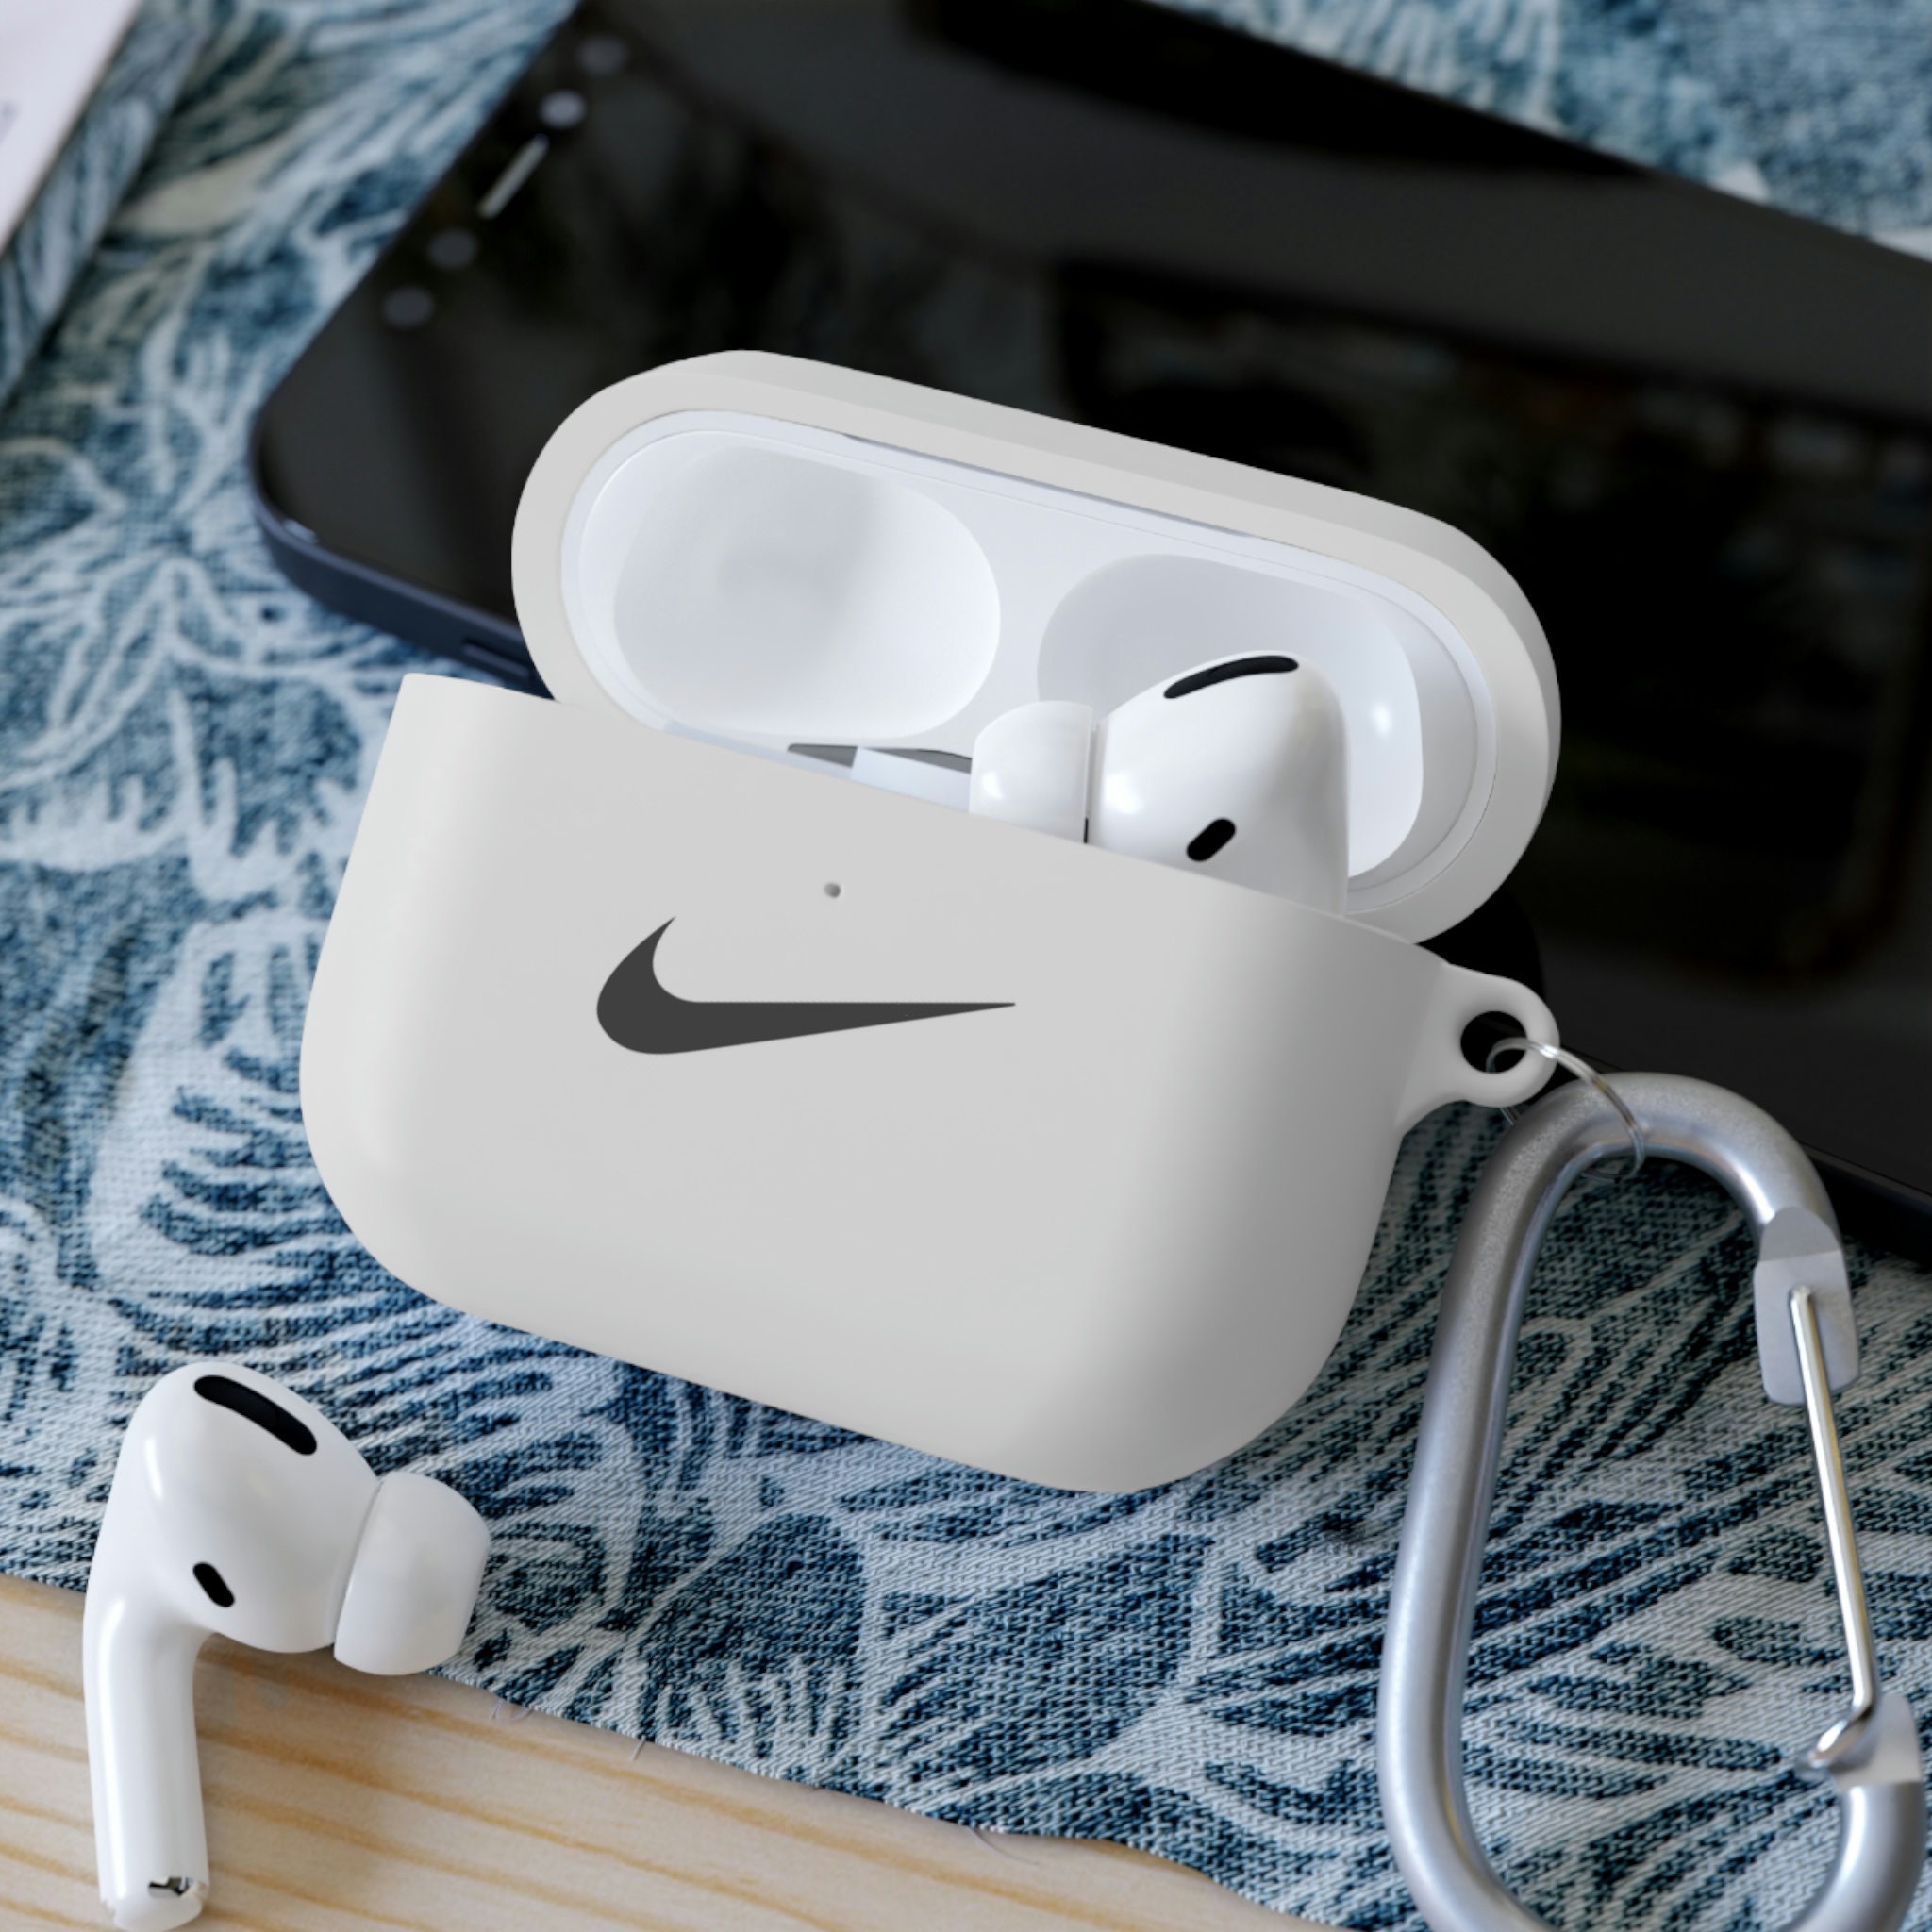 Airpods - Etsy